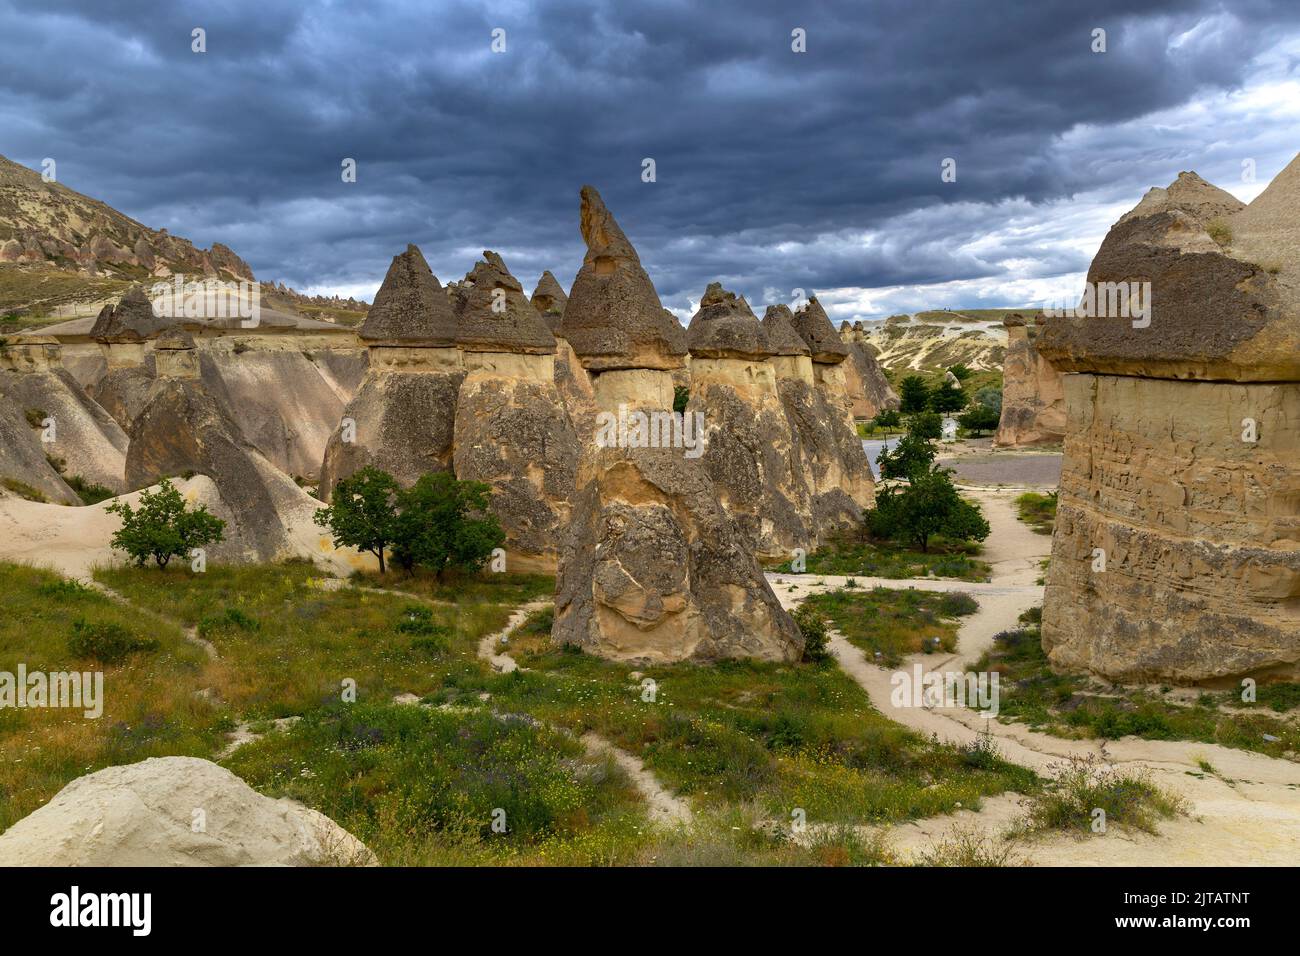 rose valley in goreme, turkey, rock formations. Stock Photo